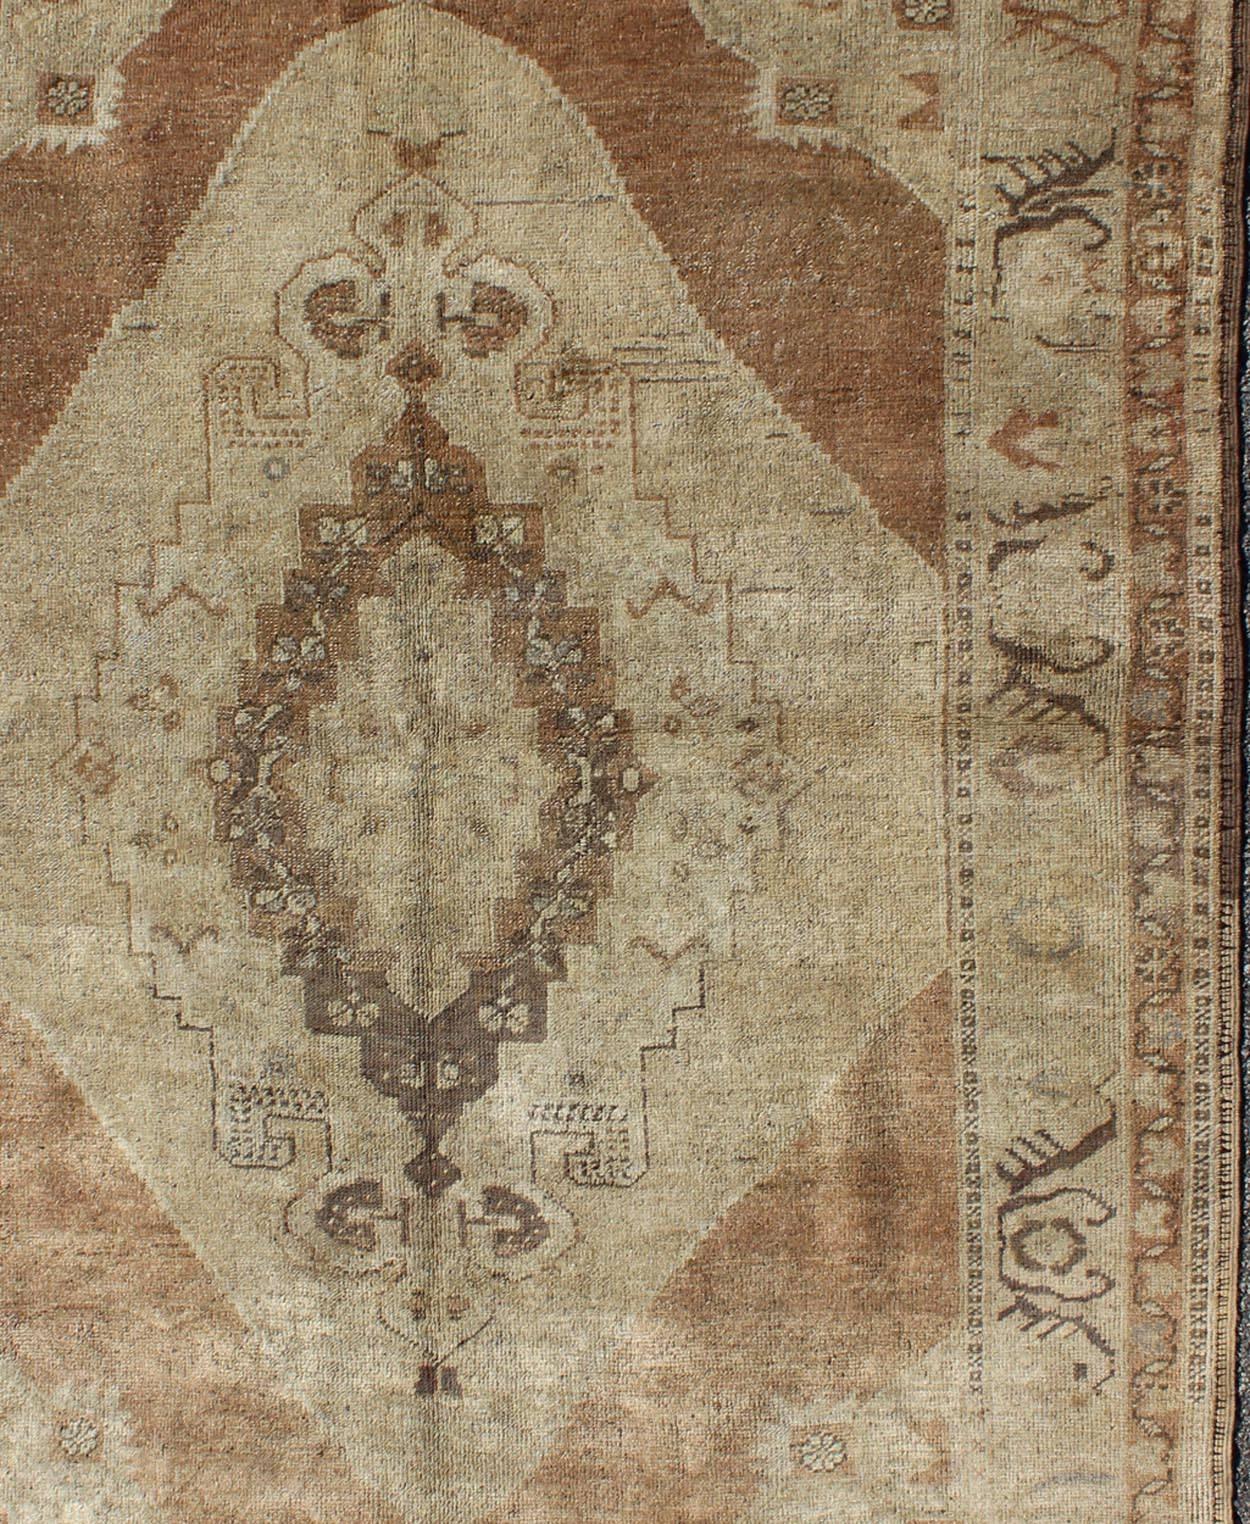 Turkish Vintage Oushak Rug with Neutral Colors